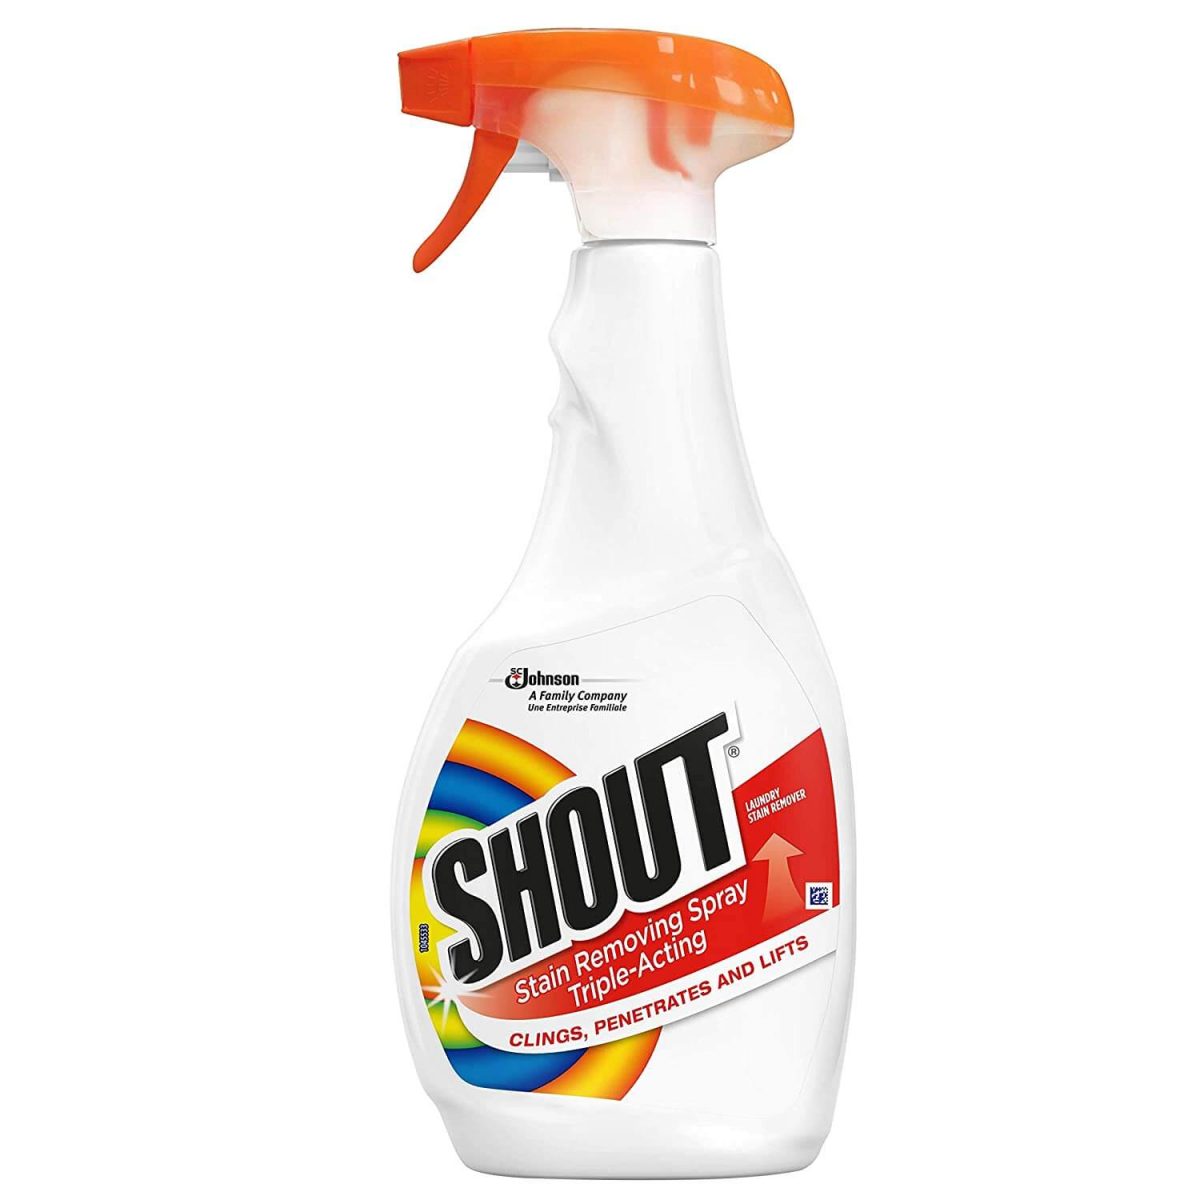 shout it out cleaner